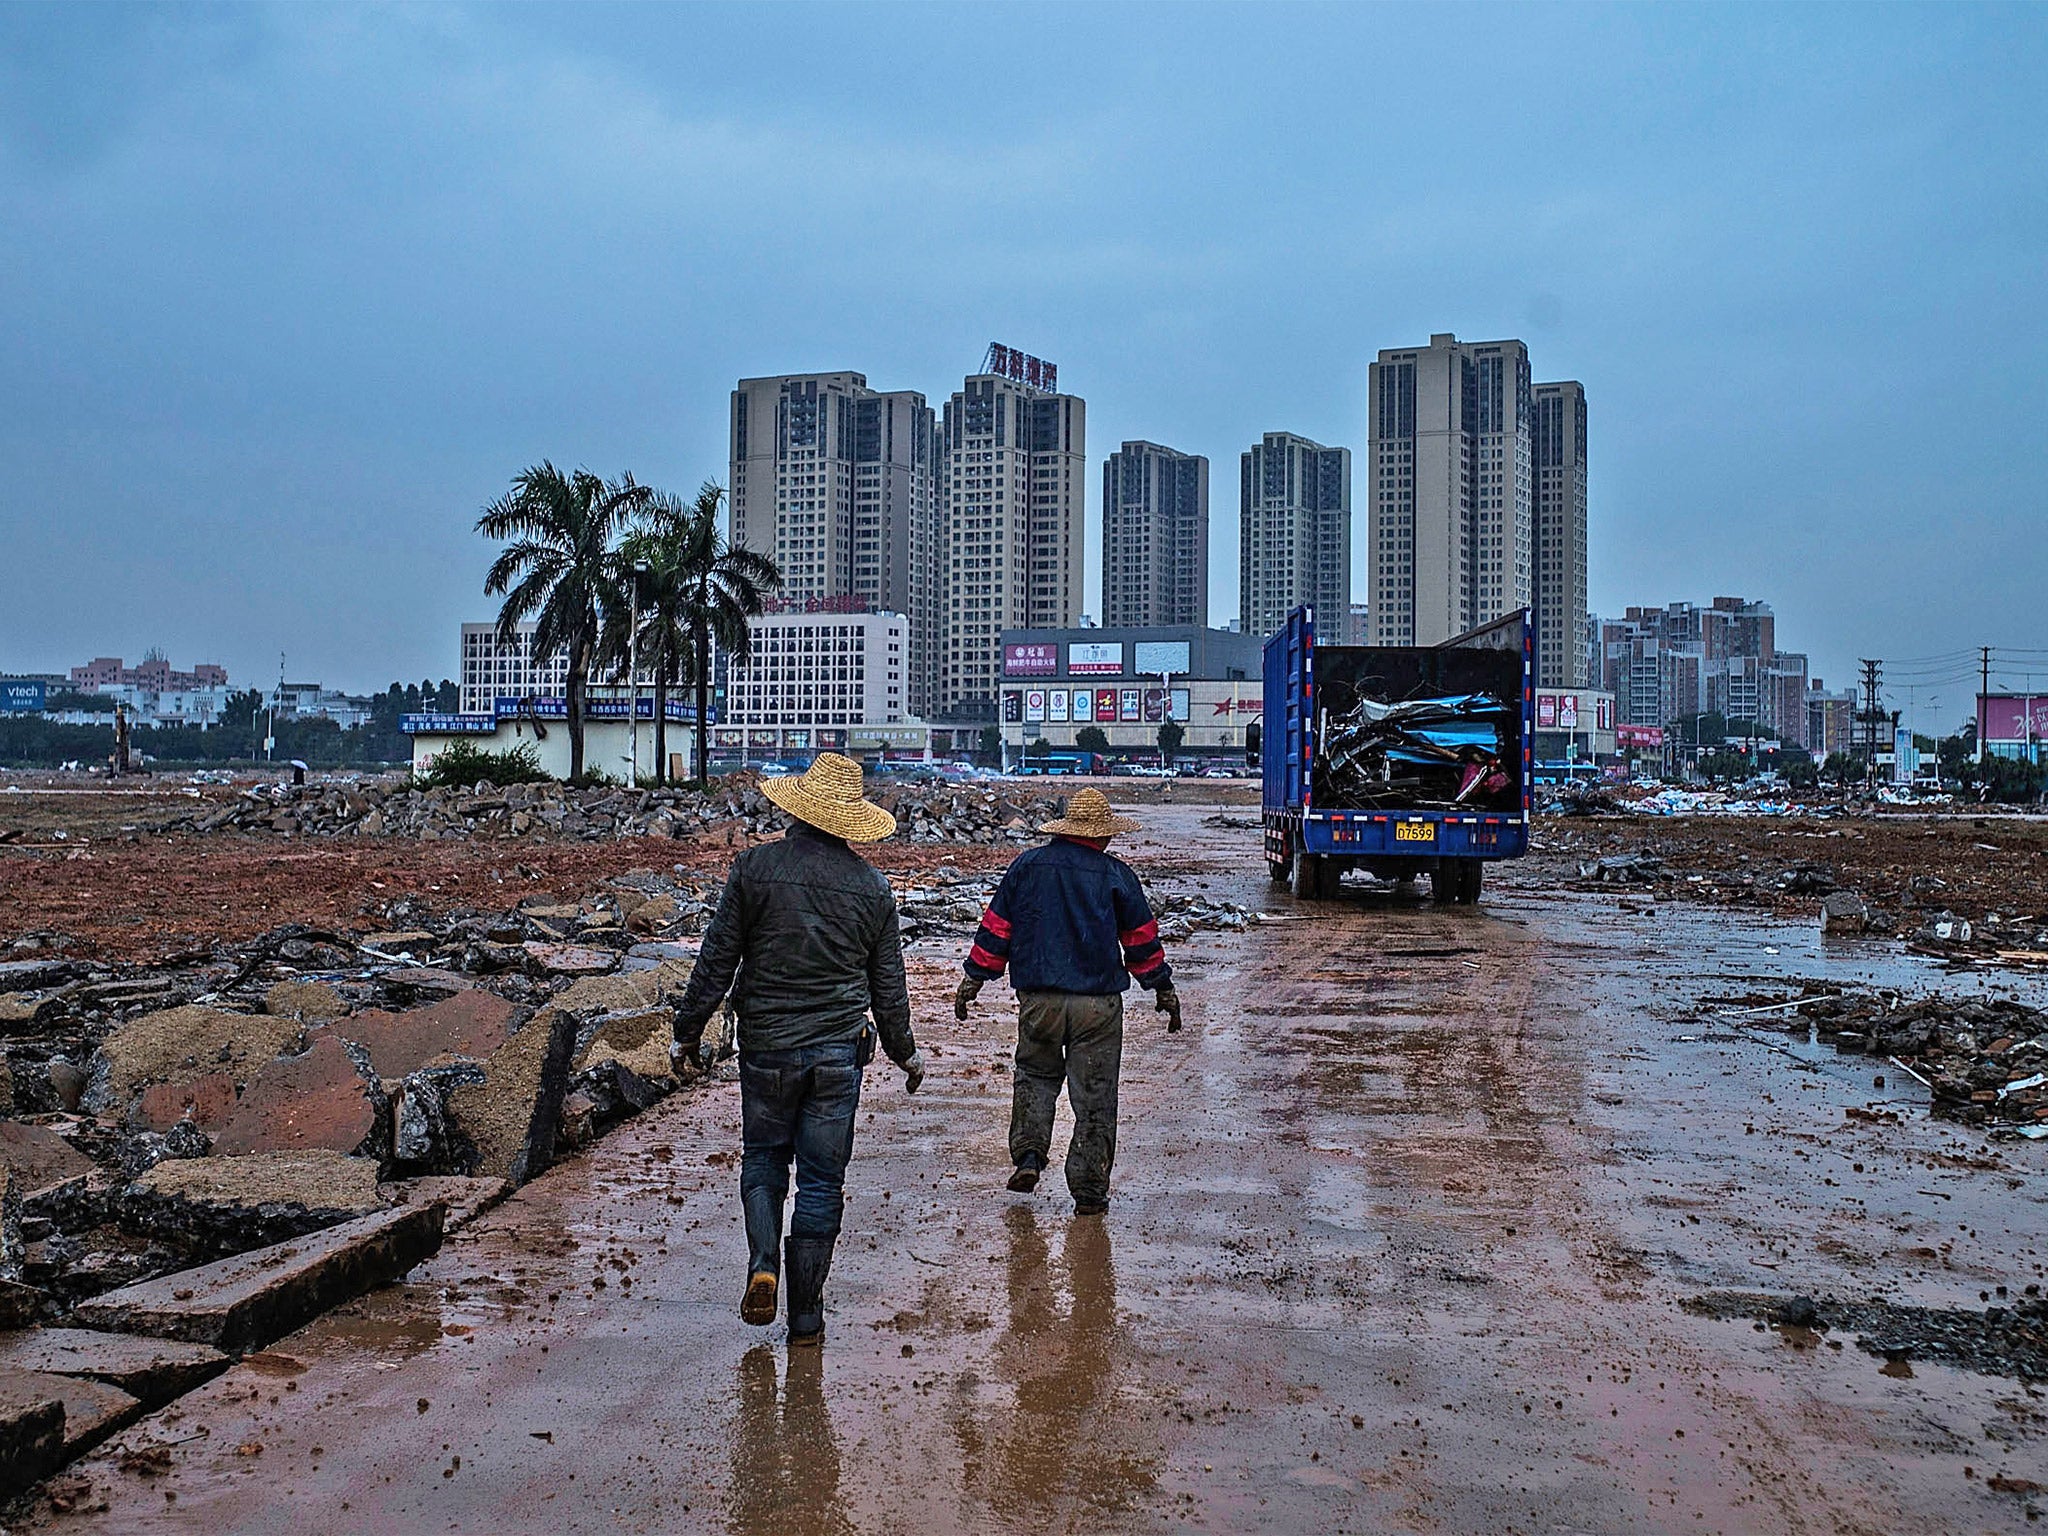 Workers walk past demolished factories in the once-thriving industrial town of Houjie, in Guangdong province